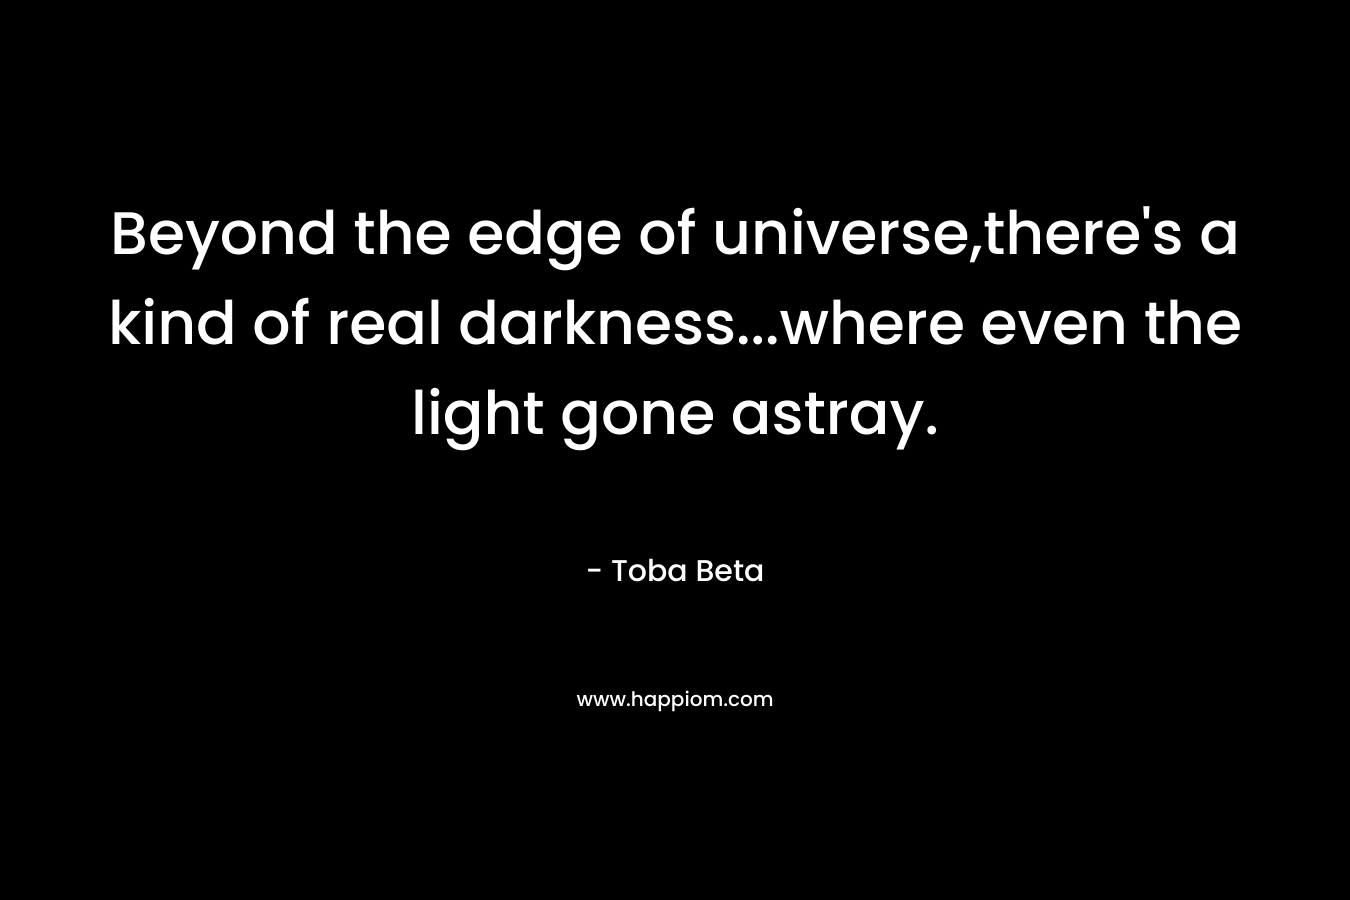 Beyond the edge of universe,there's a kind of real darkness...where even the light gone astray.